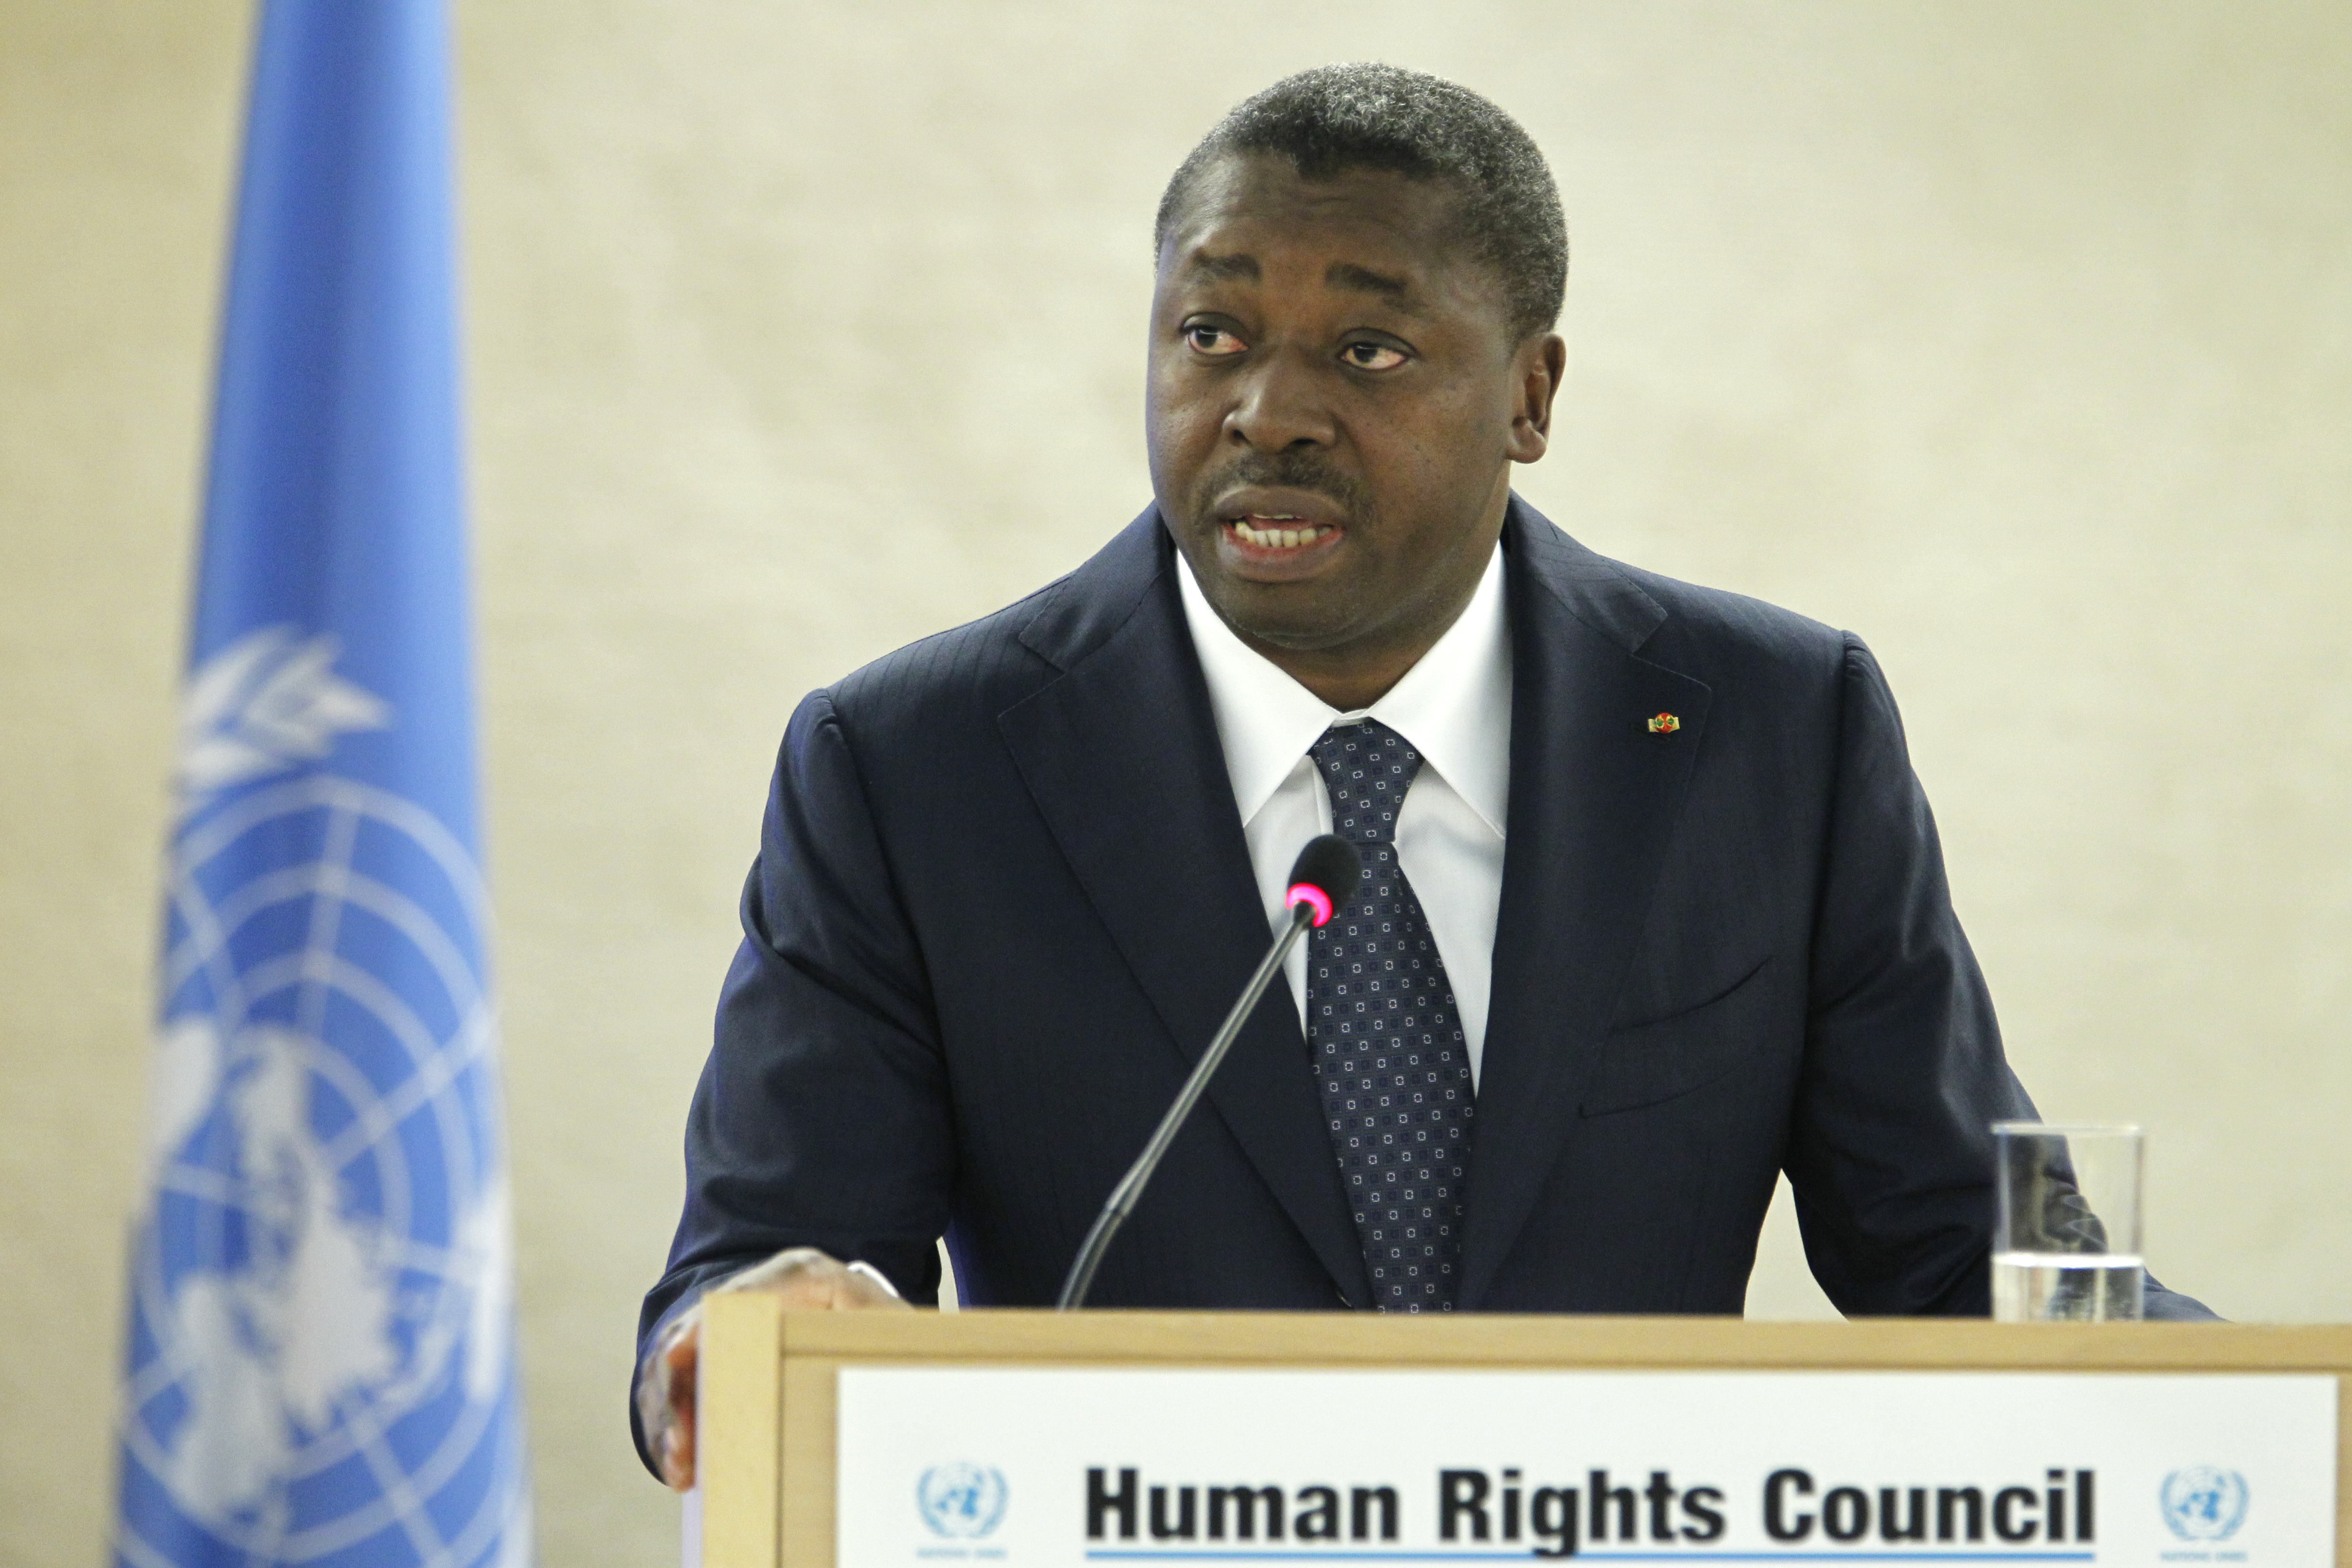 President Faure Gnassingbé speaks before UN Human Rights Council in Feb 2016 (photo credit: UN Human Rights Council)